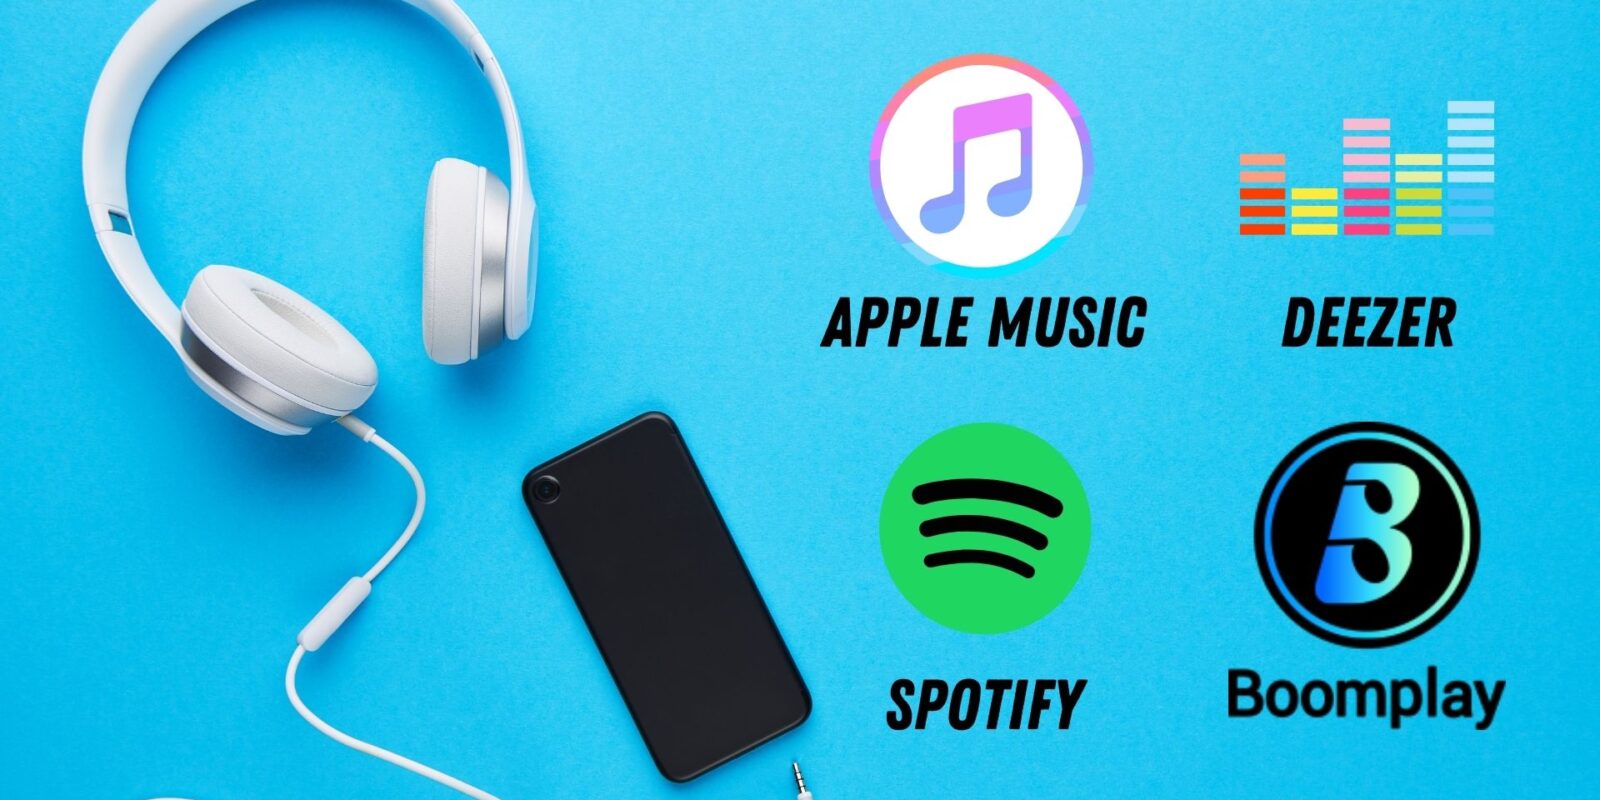 how musch does spotify cost